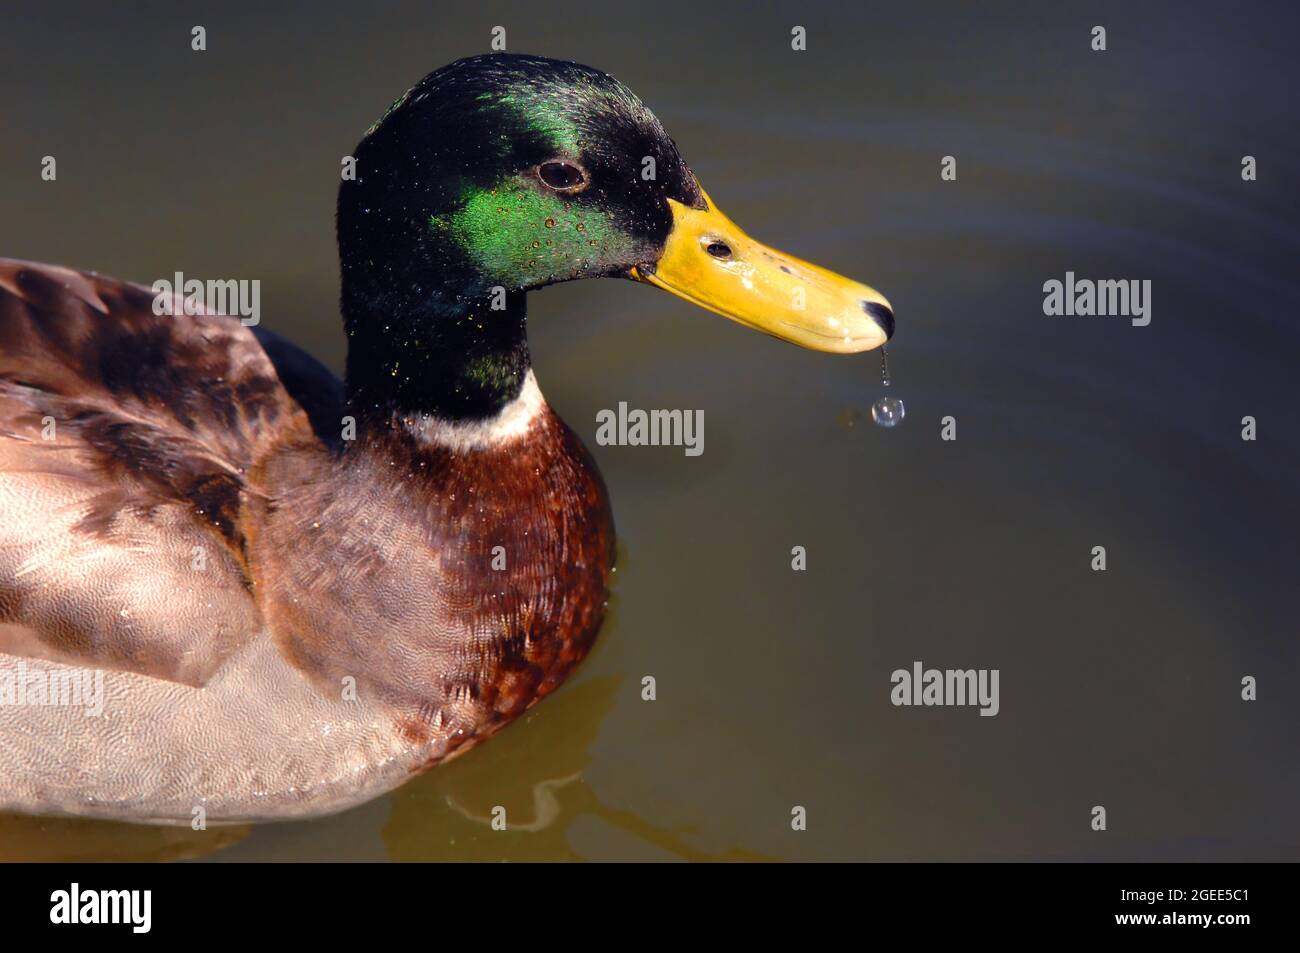 Closeup shows green head of a male mallard duck.  It is swimming in a river and has a water drop hanging from beak. Stock Photo